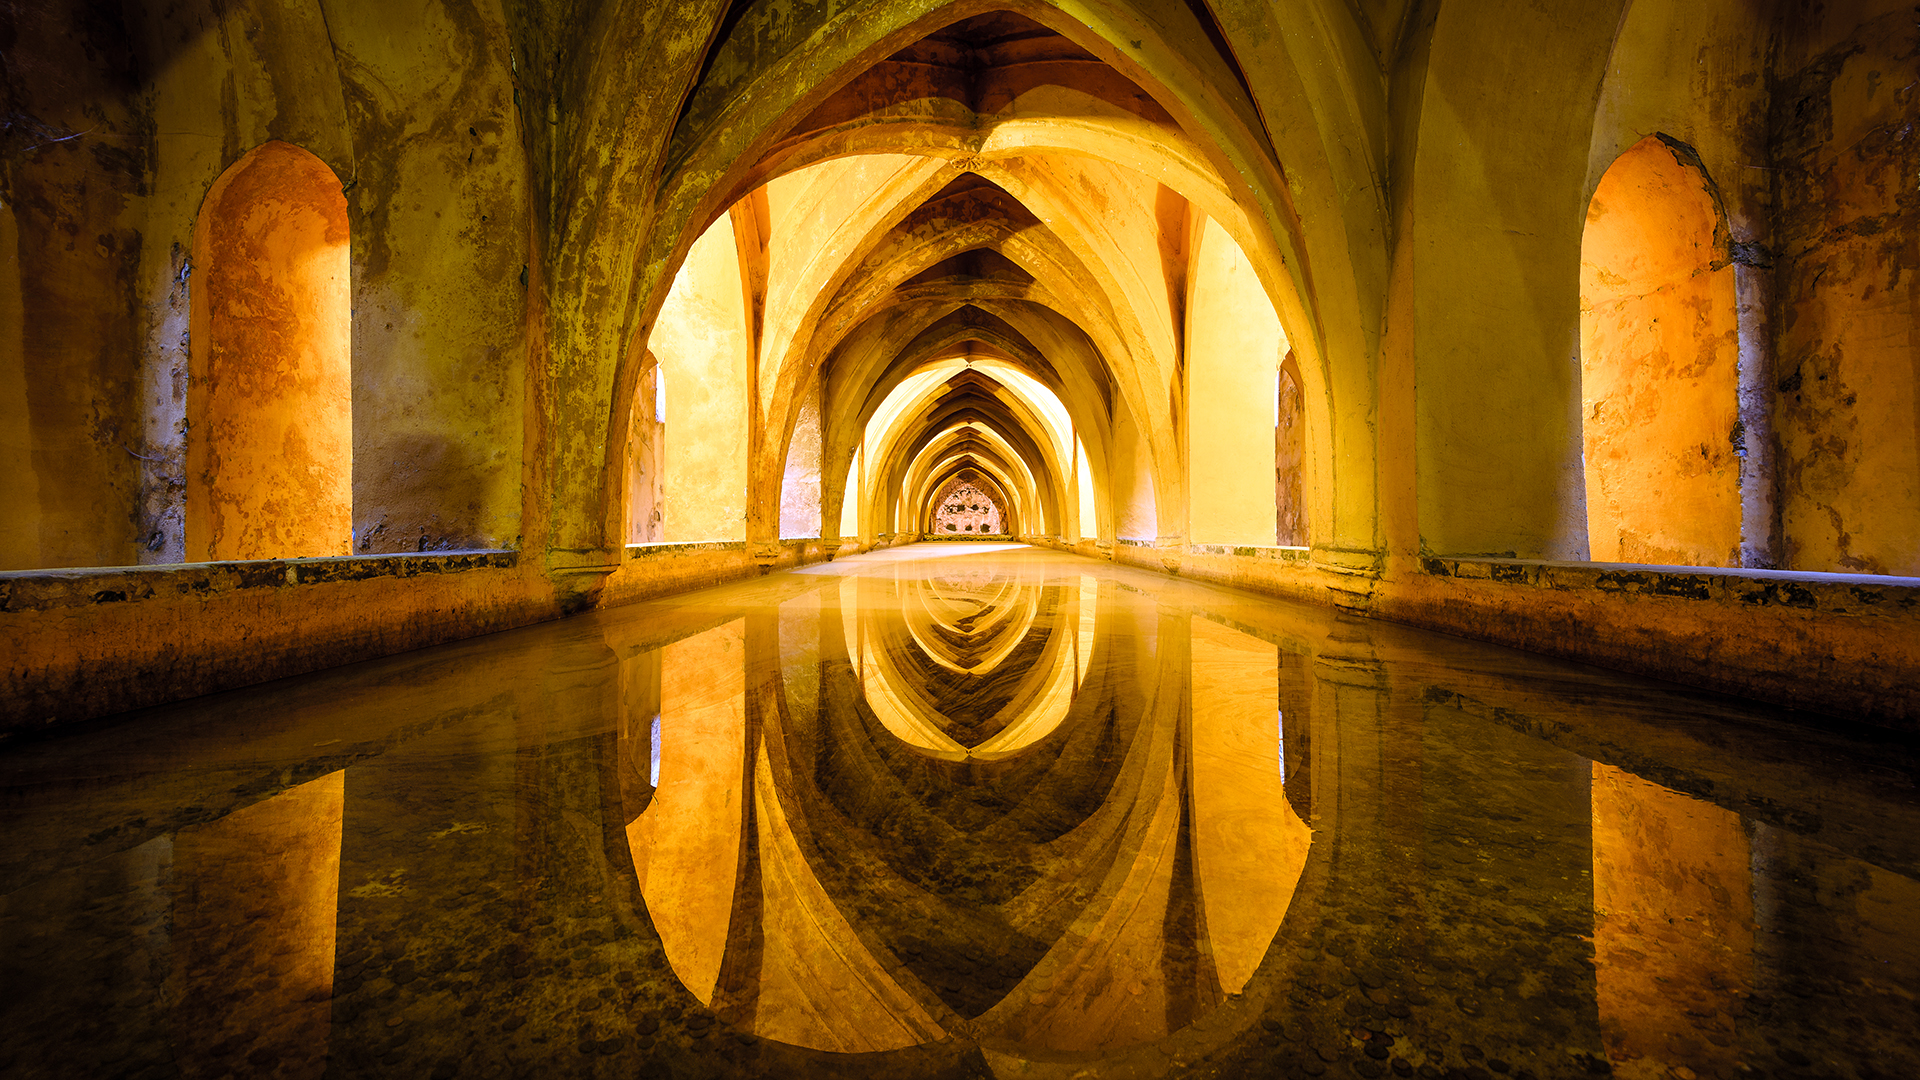 General 1920x1080 architecture building Sevilla Spain arch symmetry reflection bath water ancient yellow calm waters